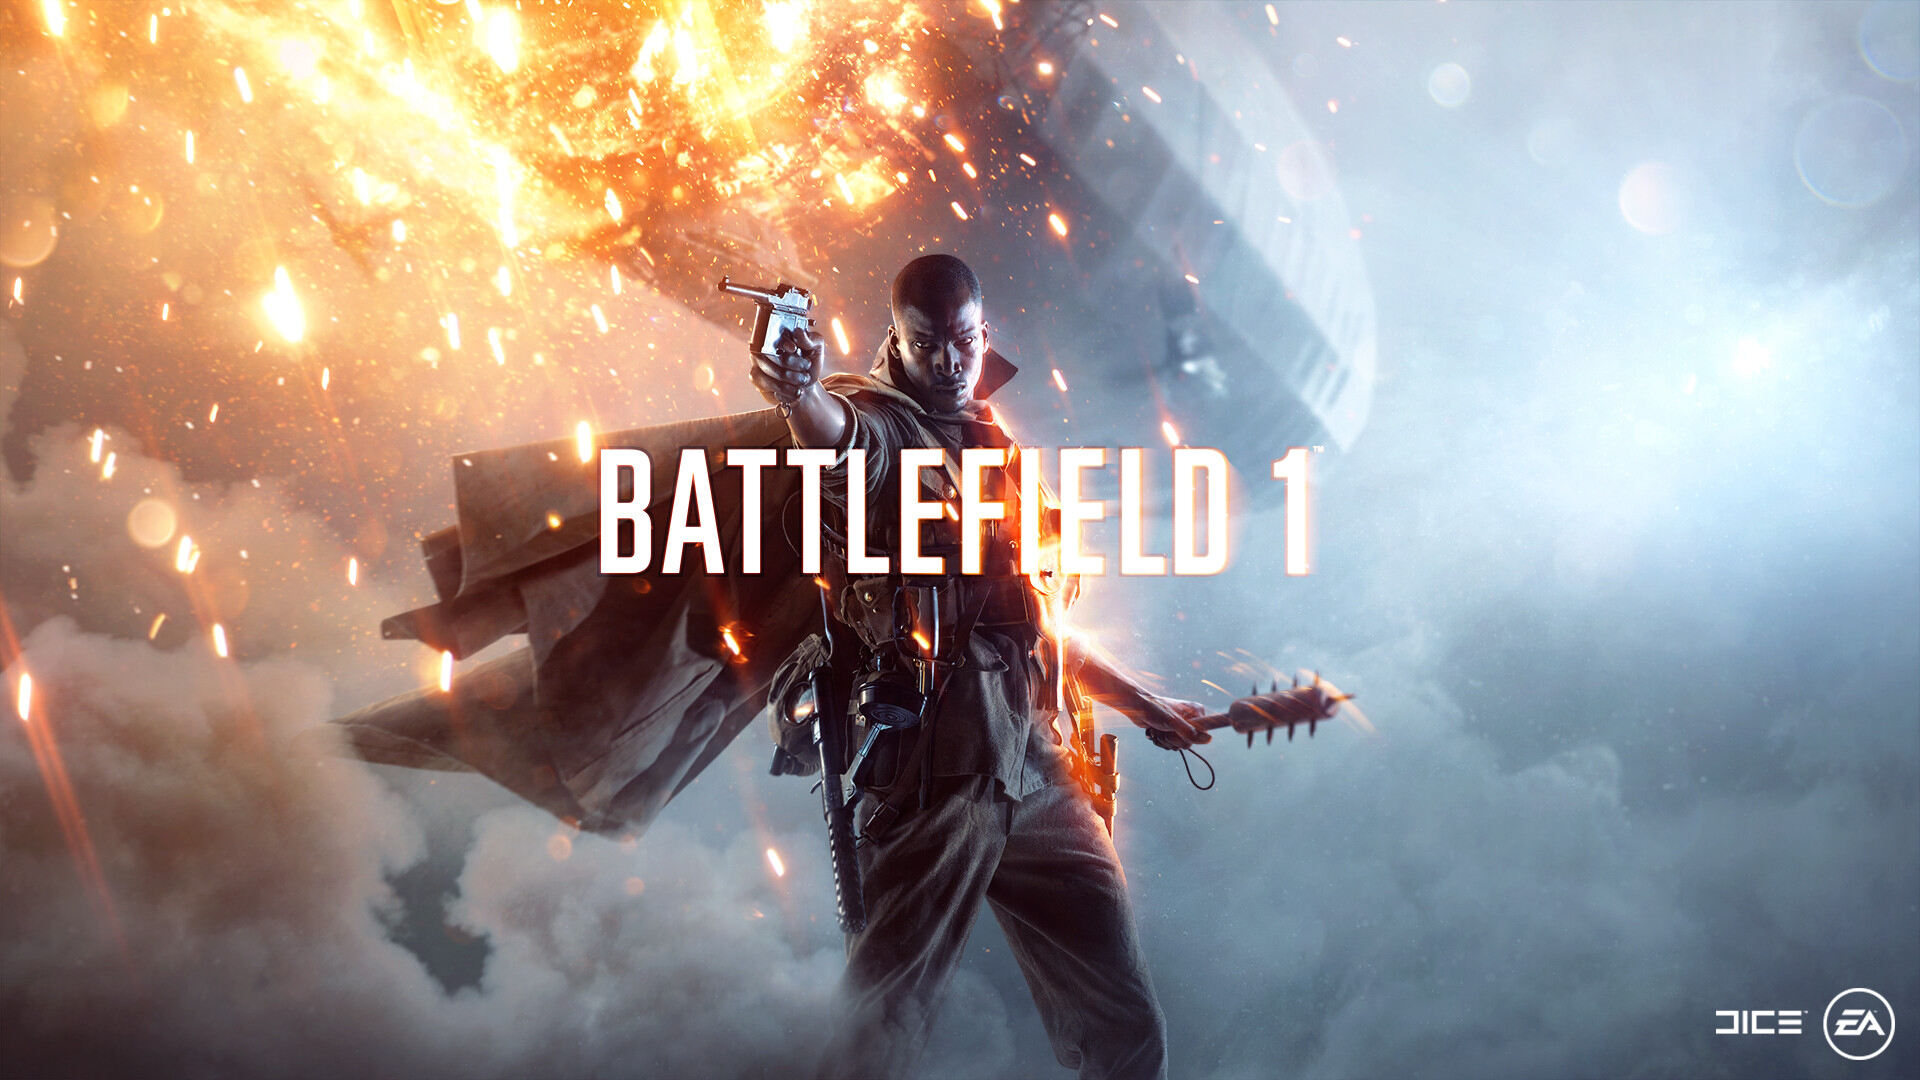 How To Download Battlefield 1 Beta PC